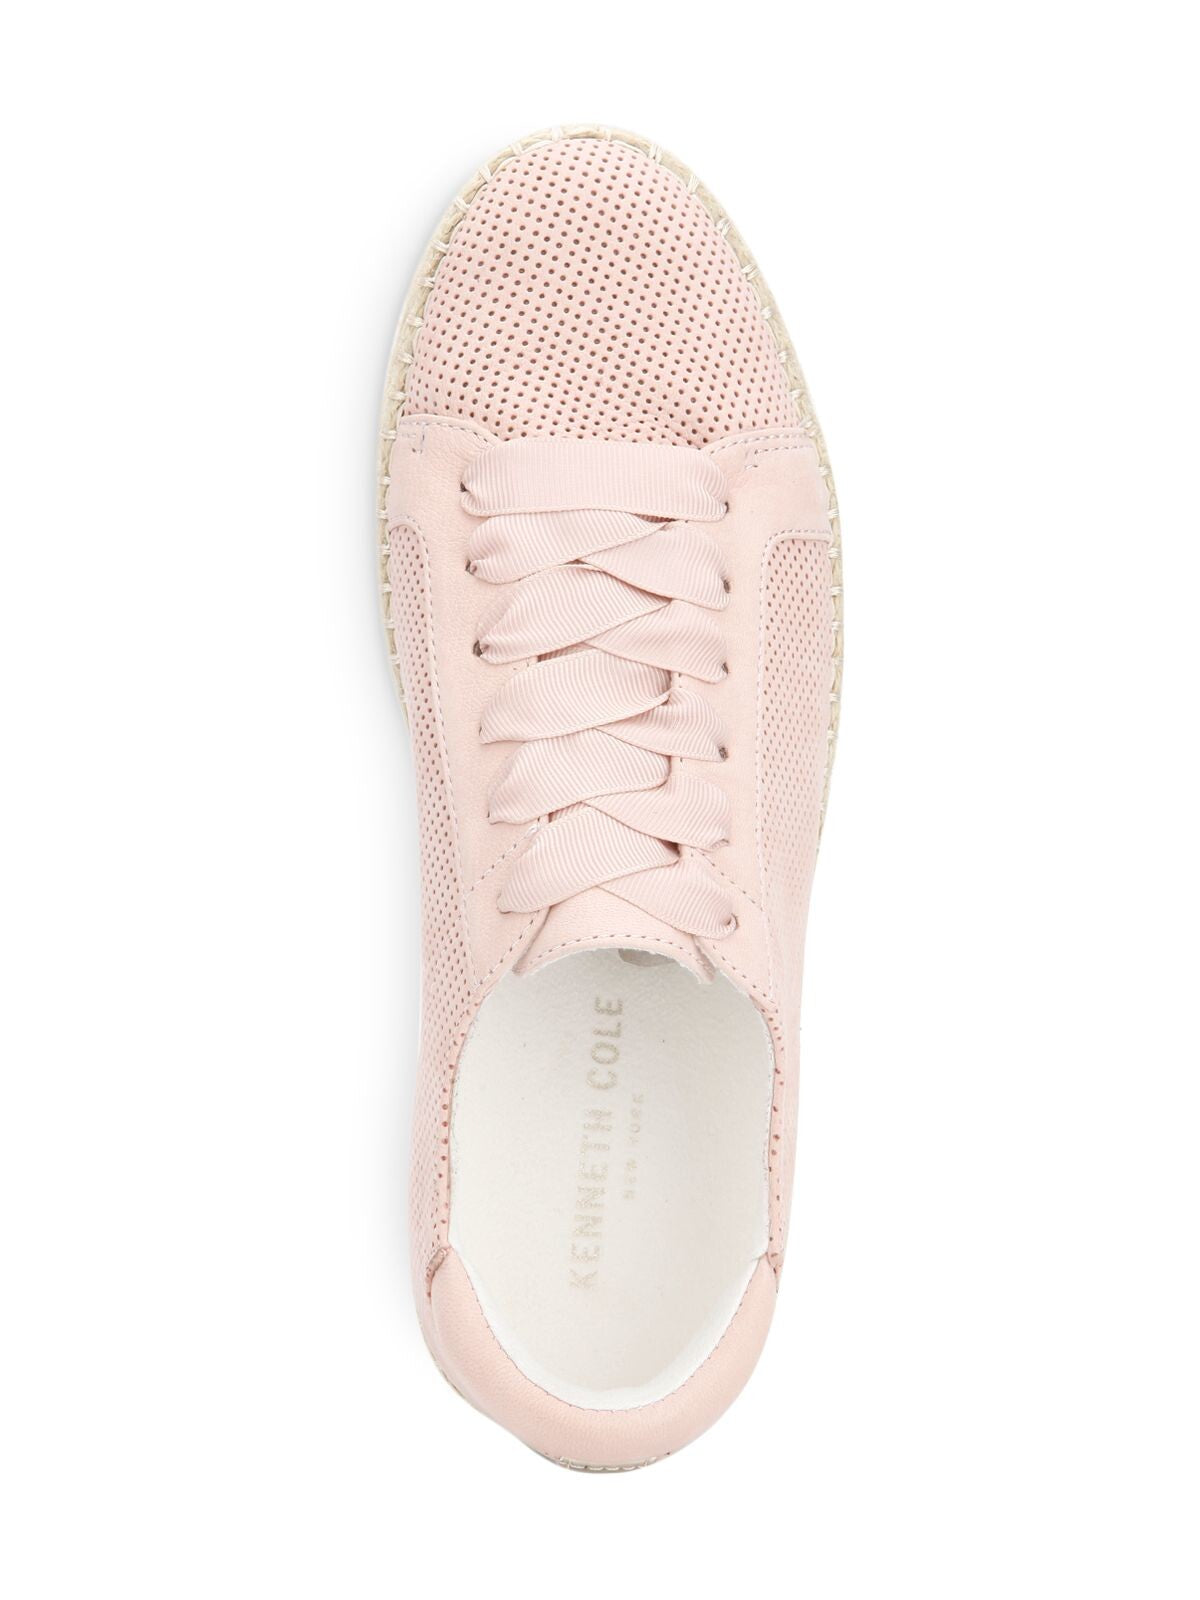 KENNETH COLE Womens Pink Perforated Espadrille Wrap Cushioned Kamspadrille Round Toe Platform Lace-Up Leather Athletic Sneakers Shoes 7.5 M